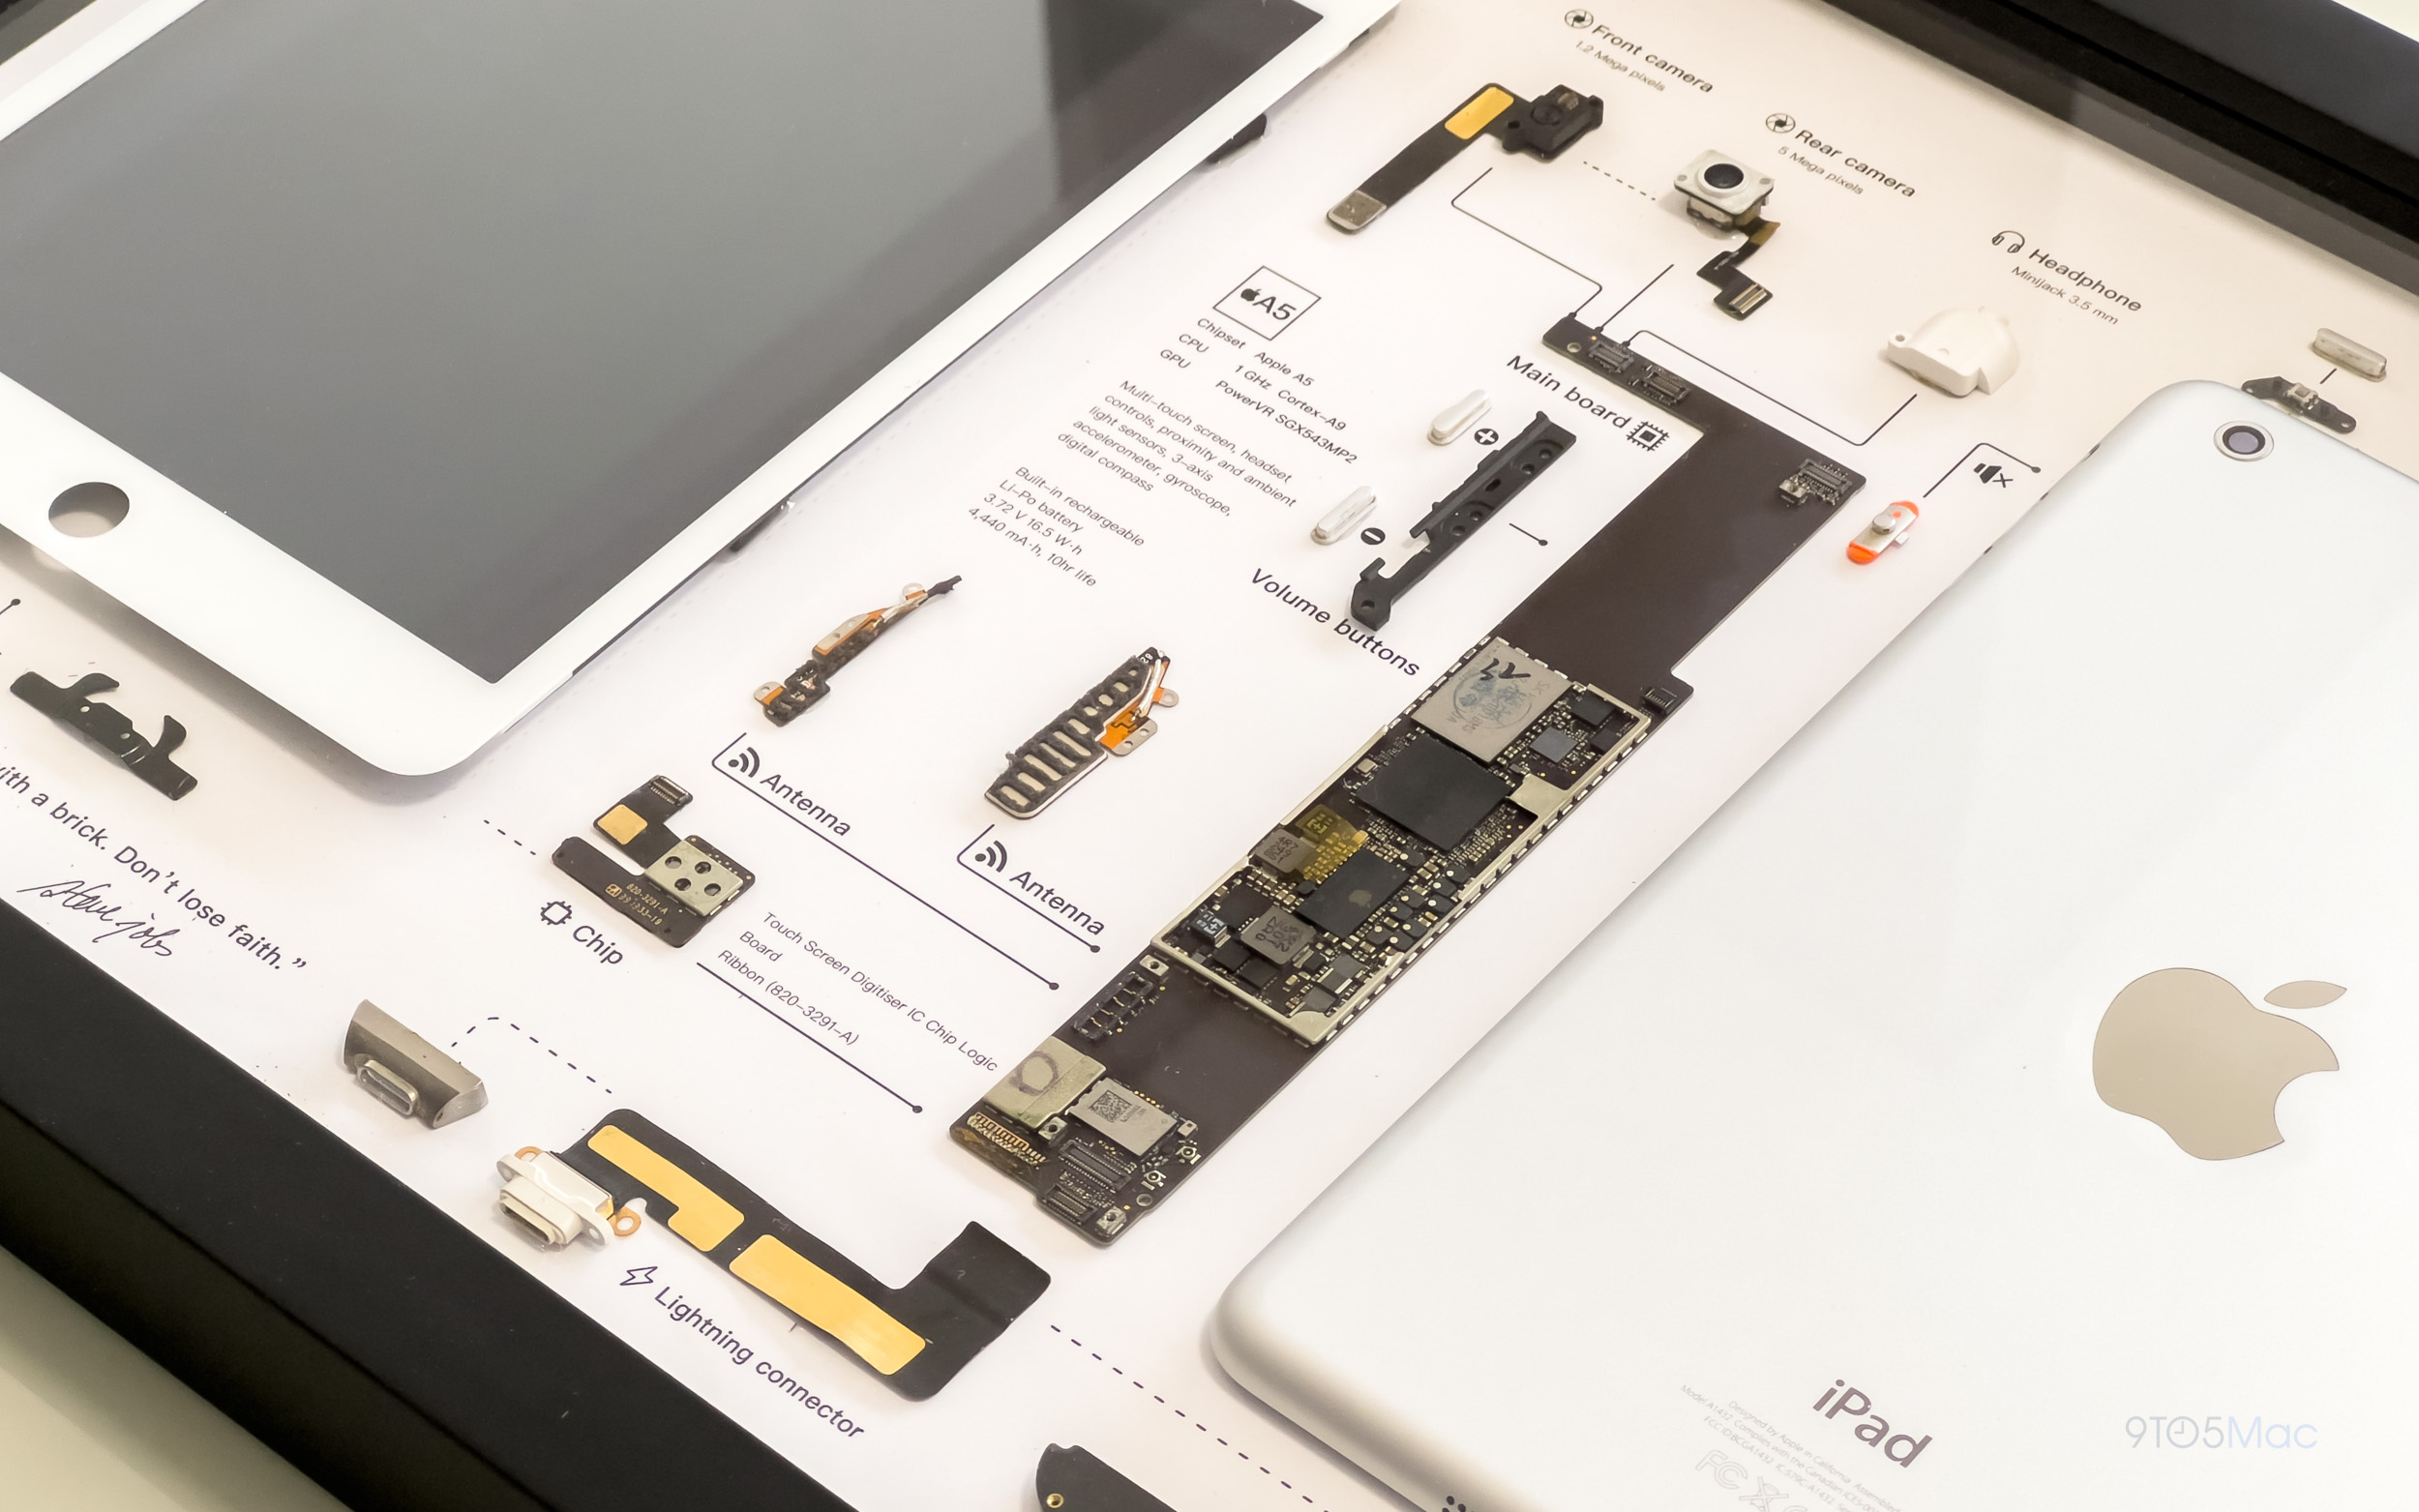 Hands-on: First generation iPad mini disassembled and framed by GRID